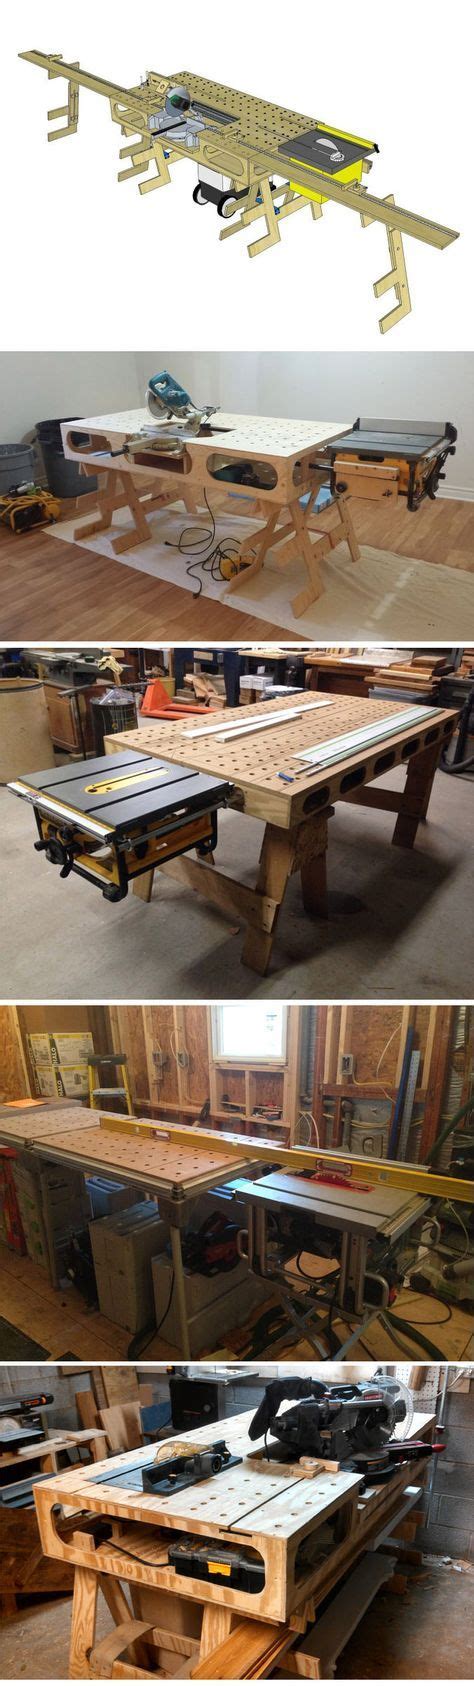 This work bench was designed by a seasoned finish carpenter and home builder who saw a need and addressed it. "Paulk Total Station" designed by Ron Paulk http://www.daileywoodworks.com/2014/12/02/my-new ...